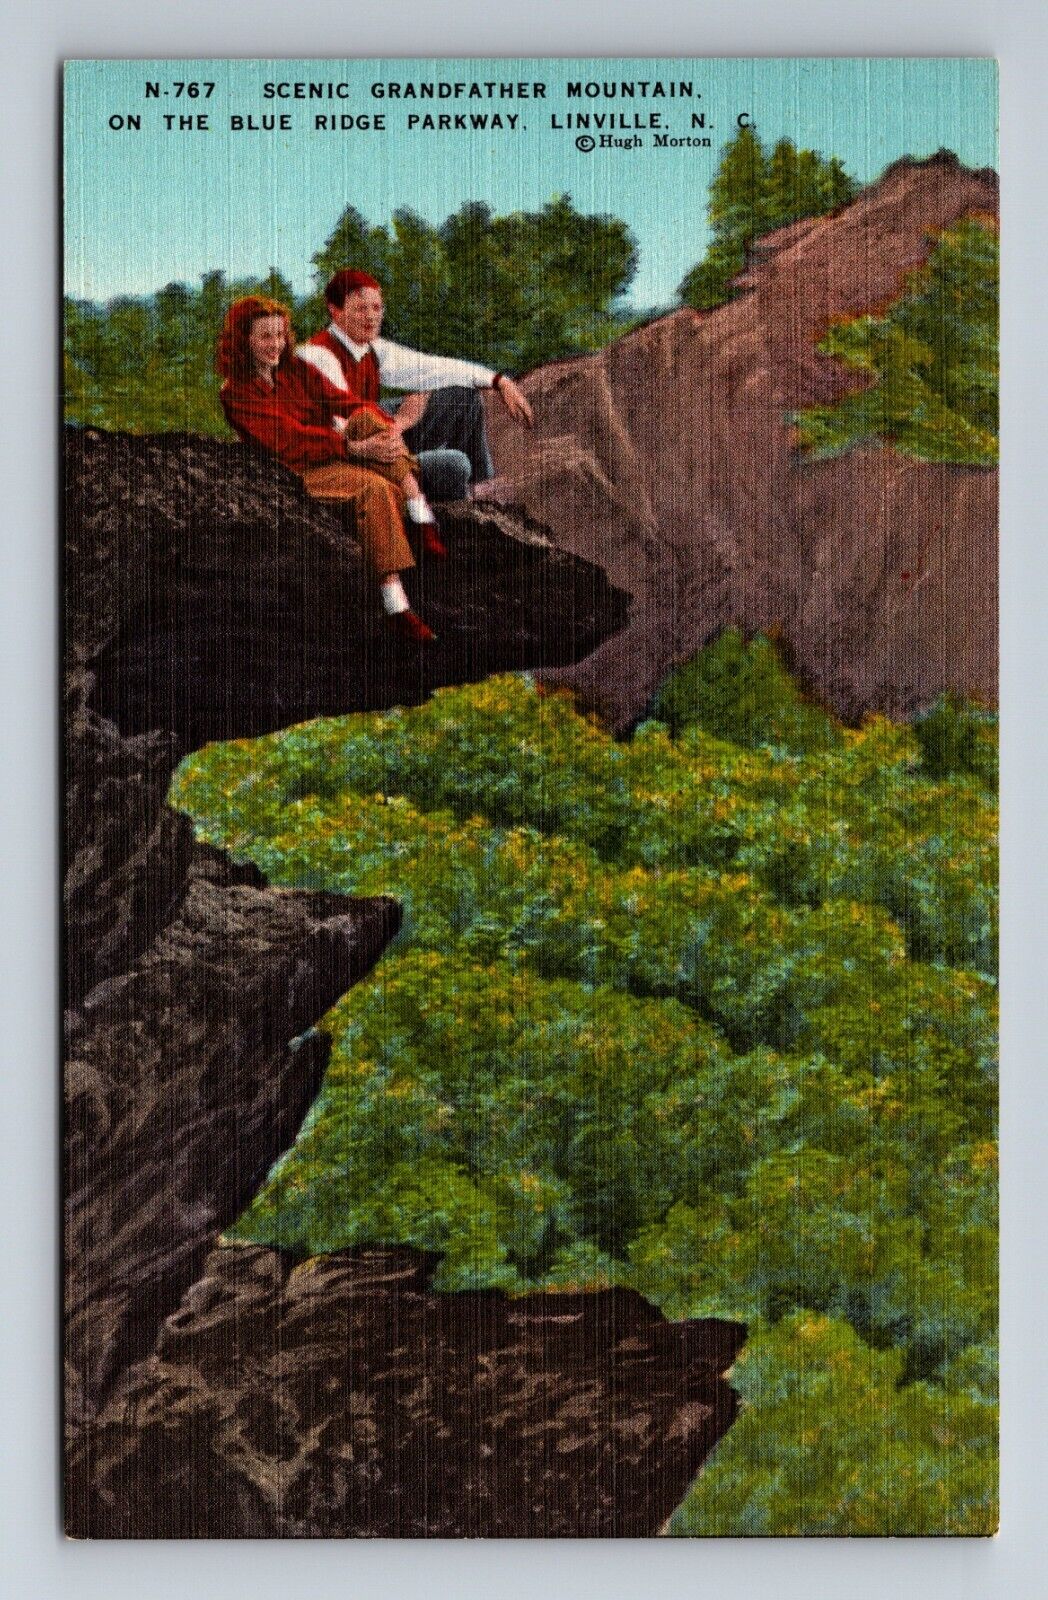 Couple at Scenic Grandfather Mountain Blue Ridge Parkway Linville NC Postcard